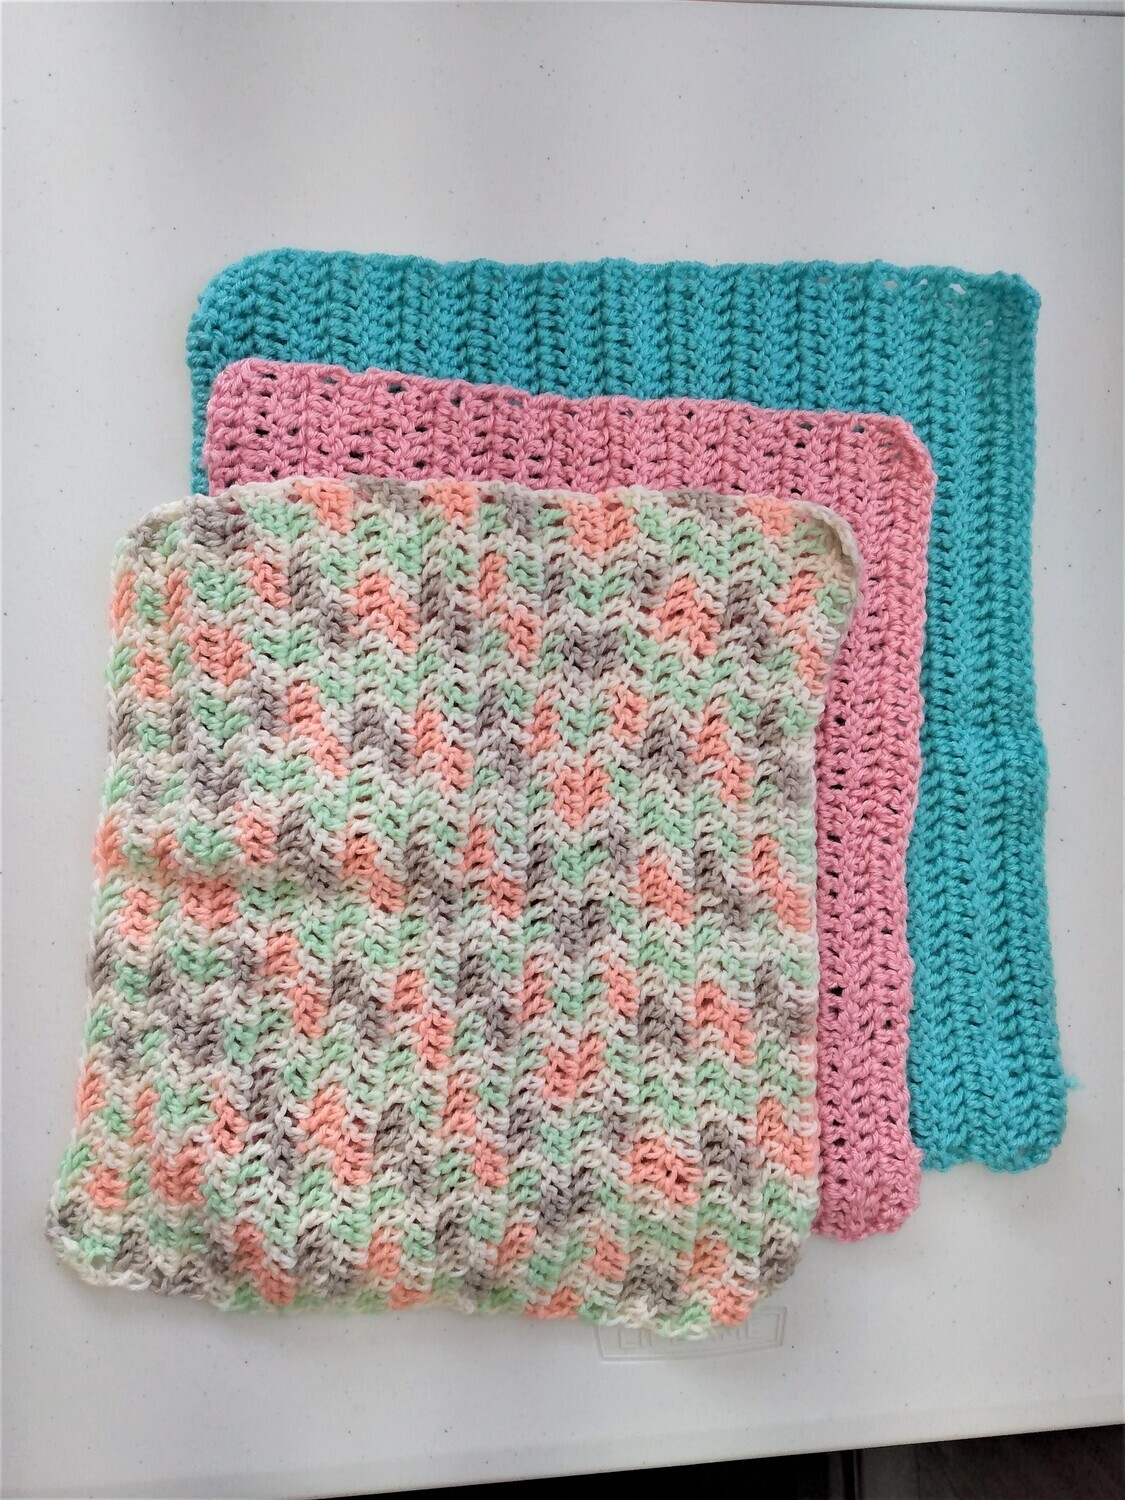 Crochet or Flannel Blanket - Free with purchase of Casket